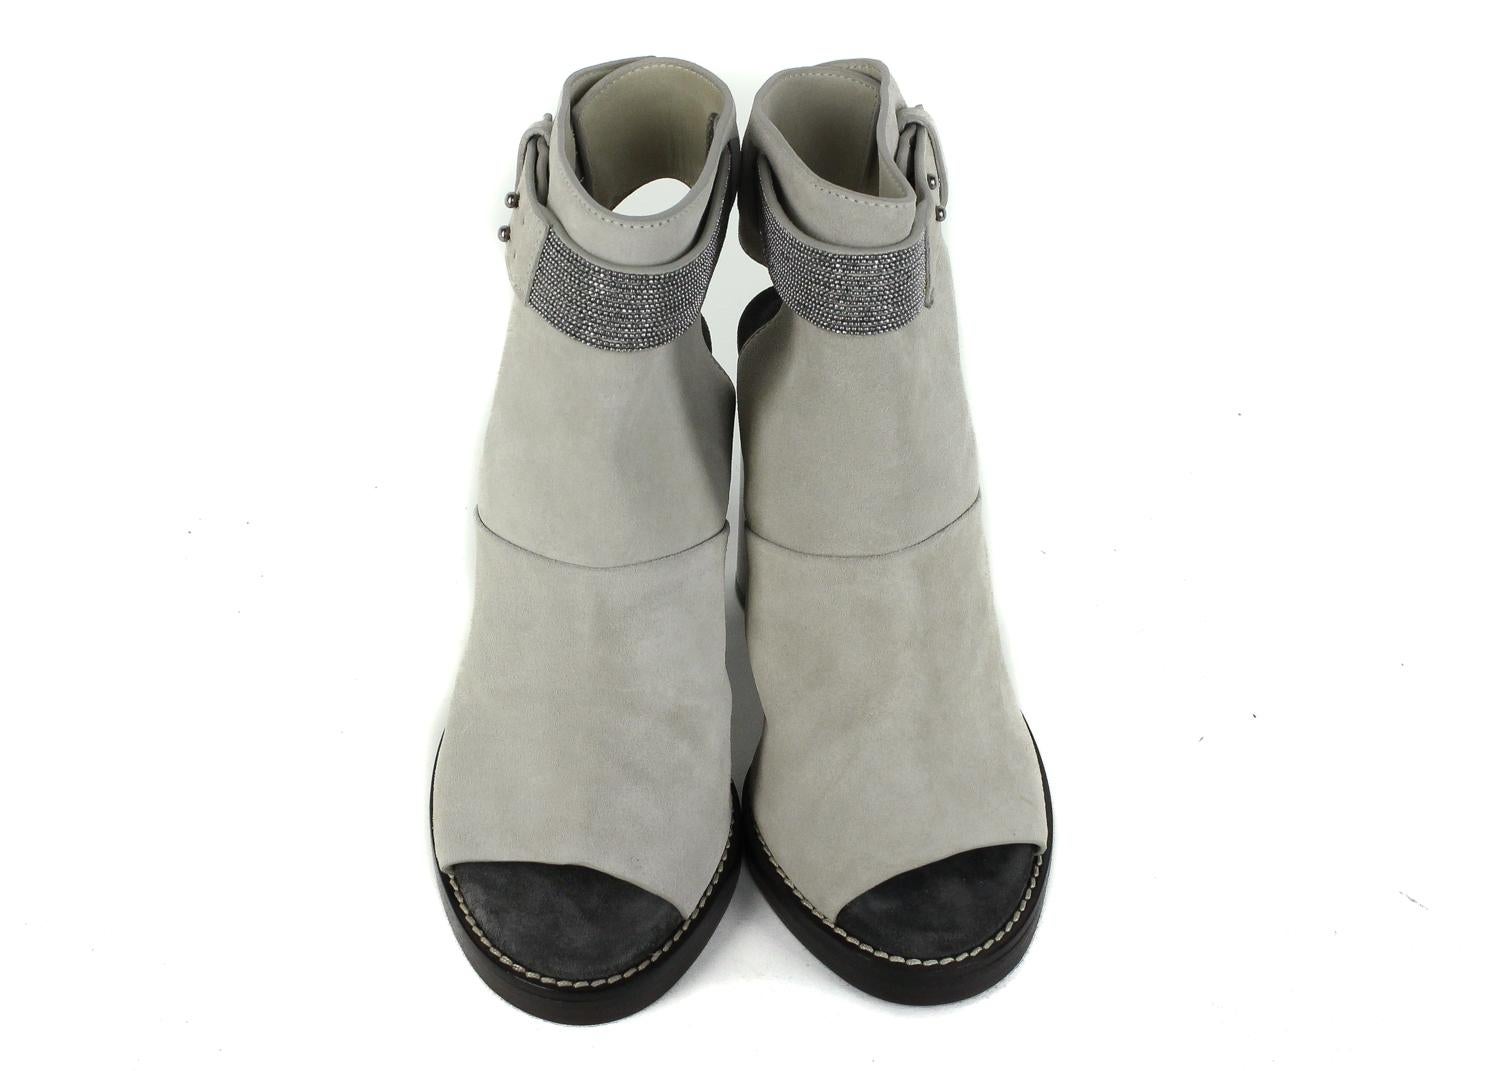 Brunello Cucinelli Grey Peep Toe Monili Suede Pumps.  These pumps feature a beaded strap and heel cut out.  These are the perfect addition for an everyday look with jeans and a casual top. 



Suede 
Peep Toe 
Heel Cut Out 
Beaded Strap 
Pull on